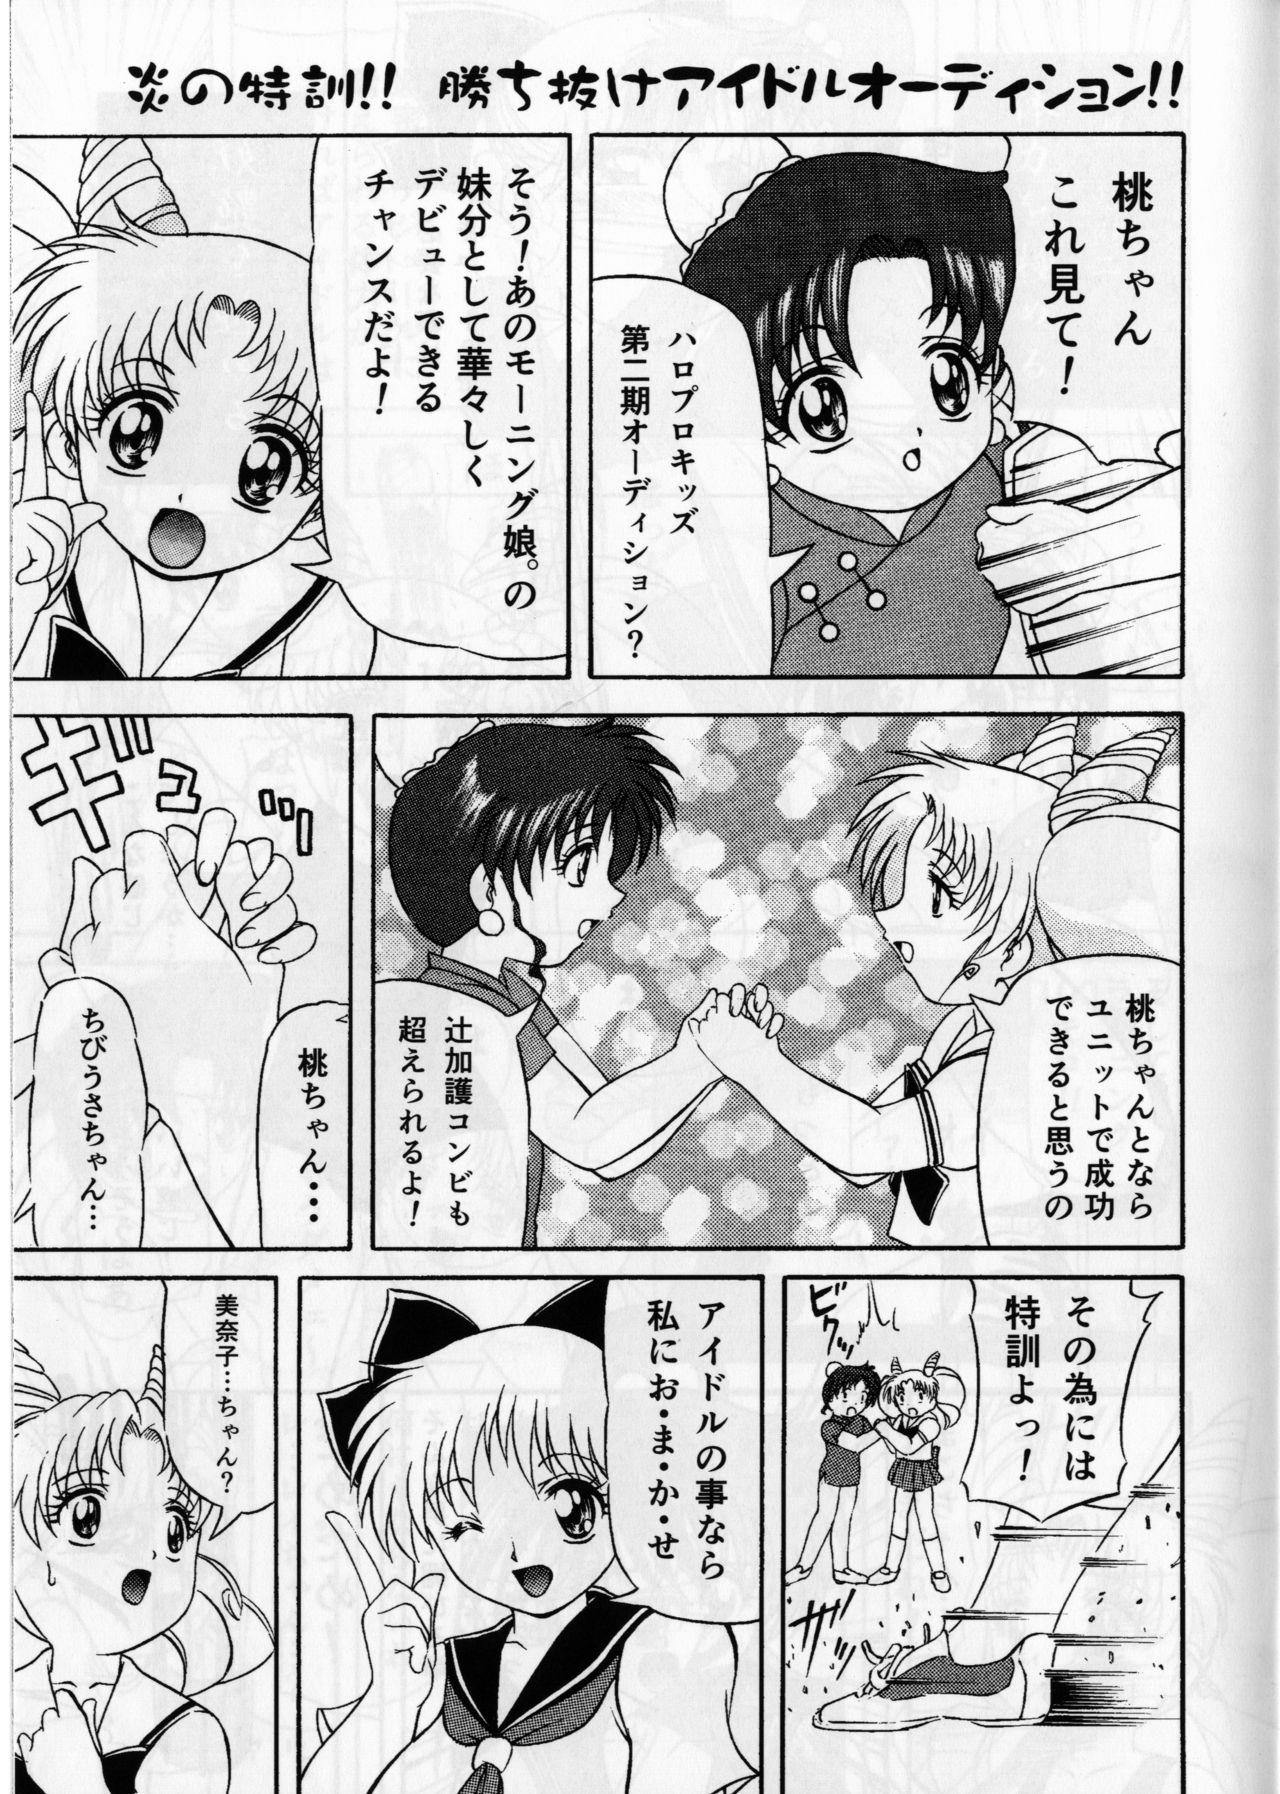 Instagram Pink Sugar 20th Anniversary Special - Sailor moon Groping - Page 7